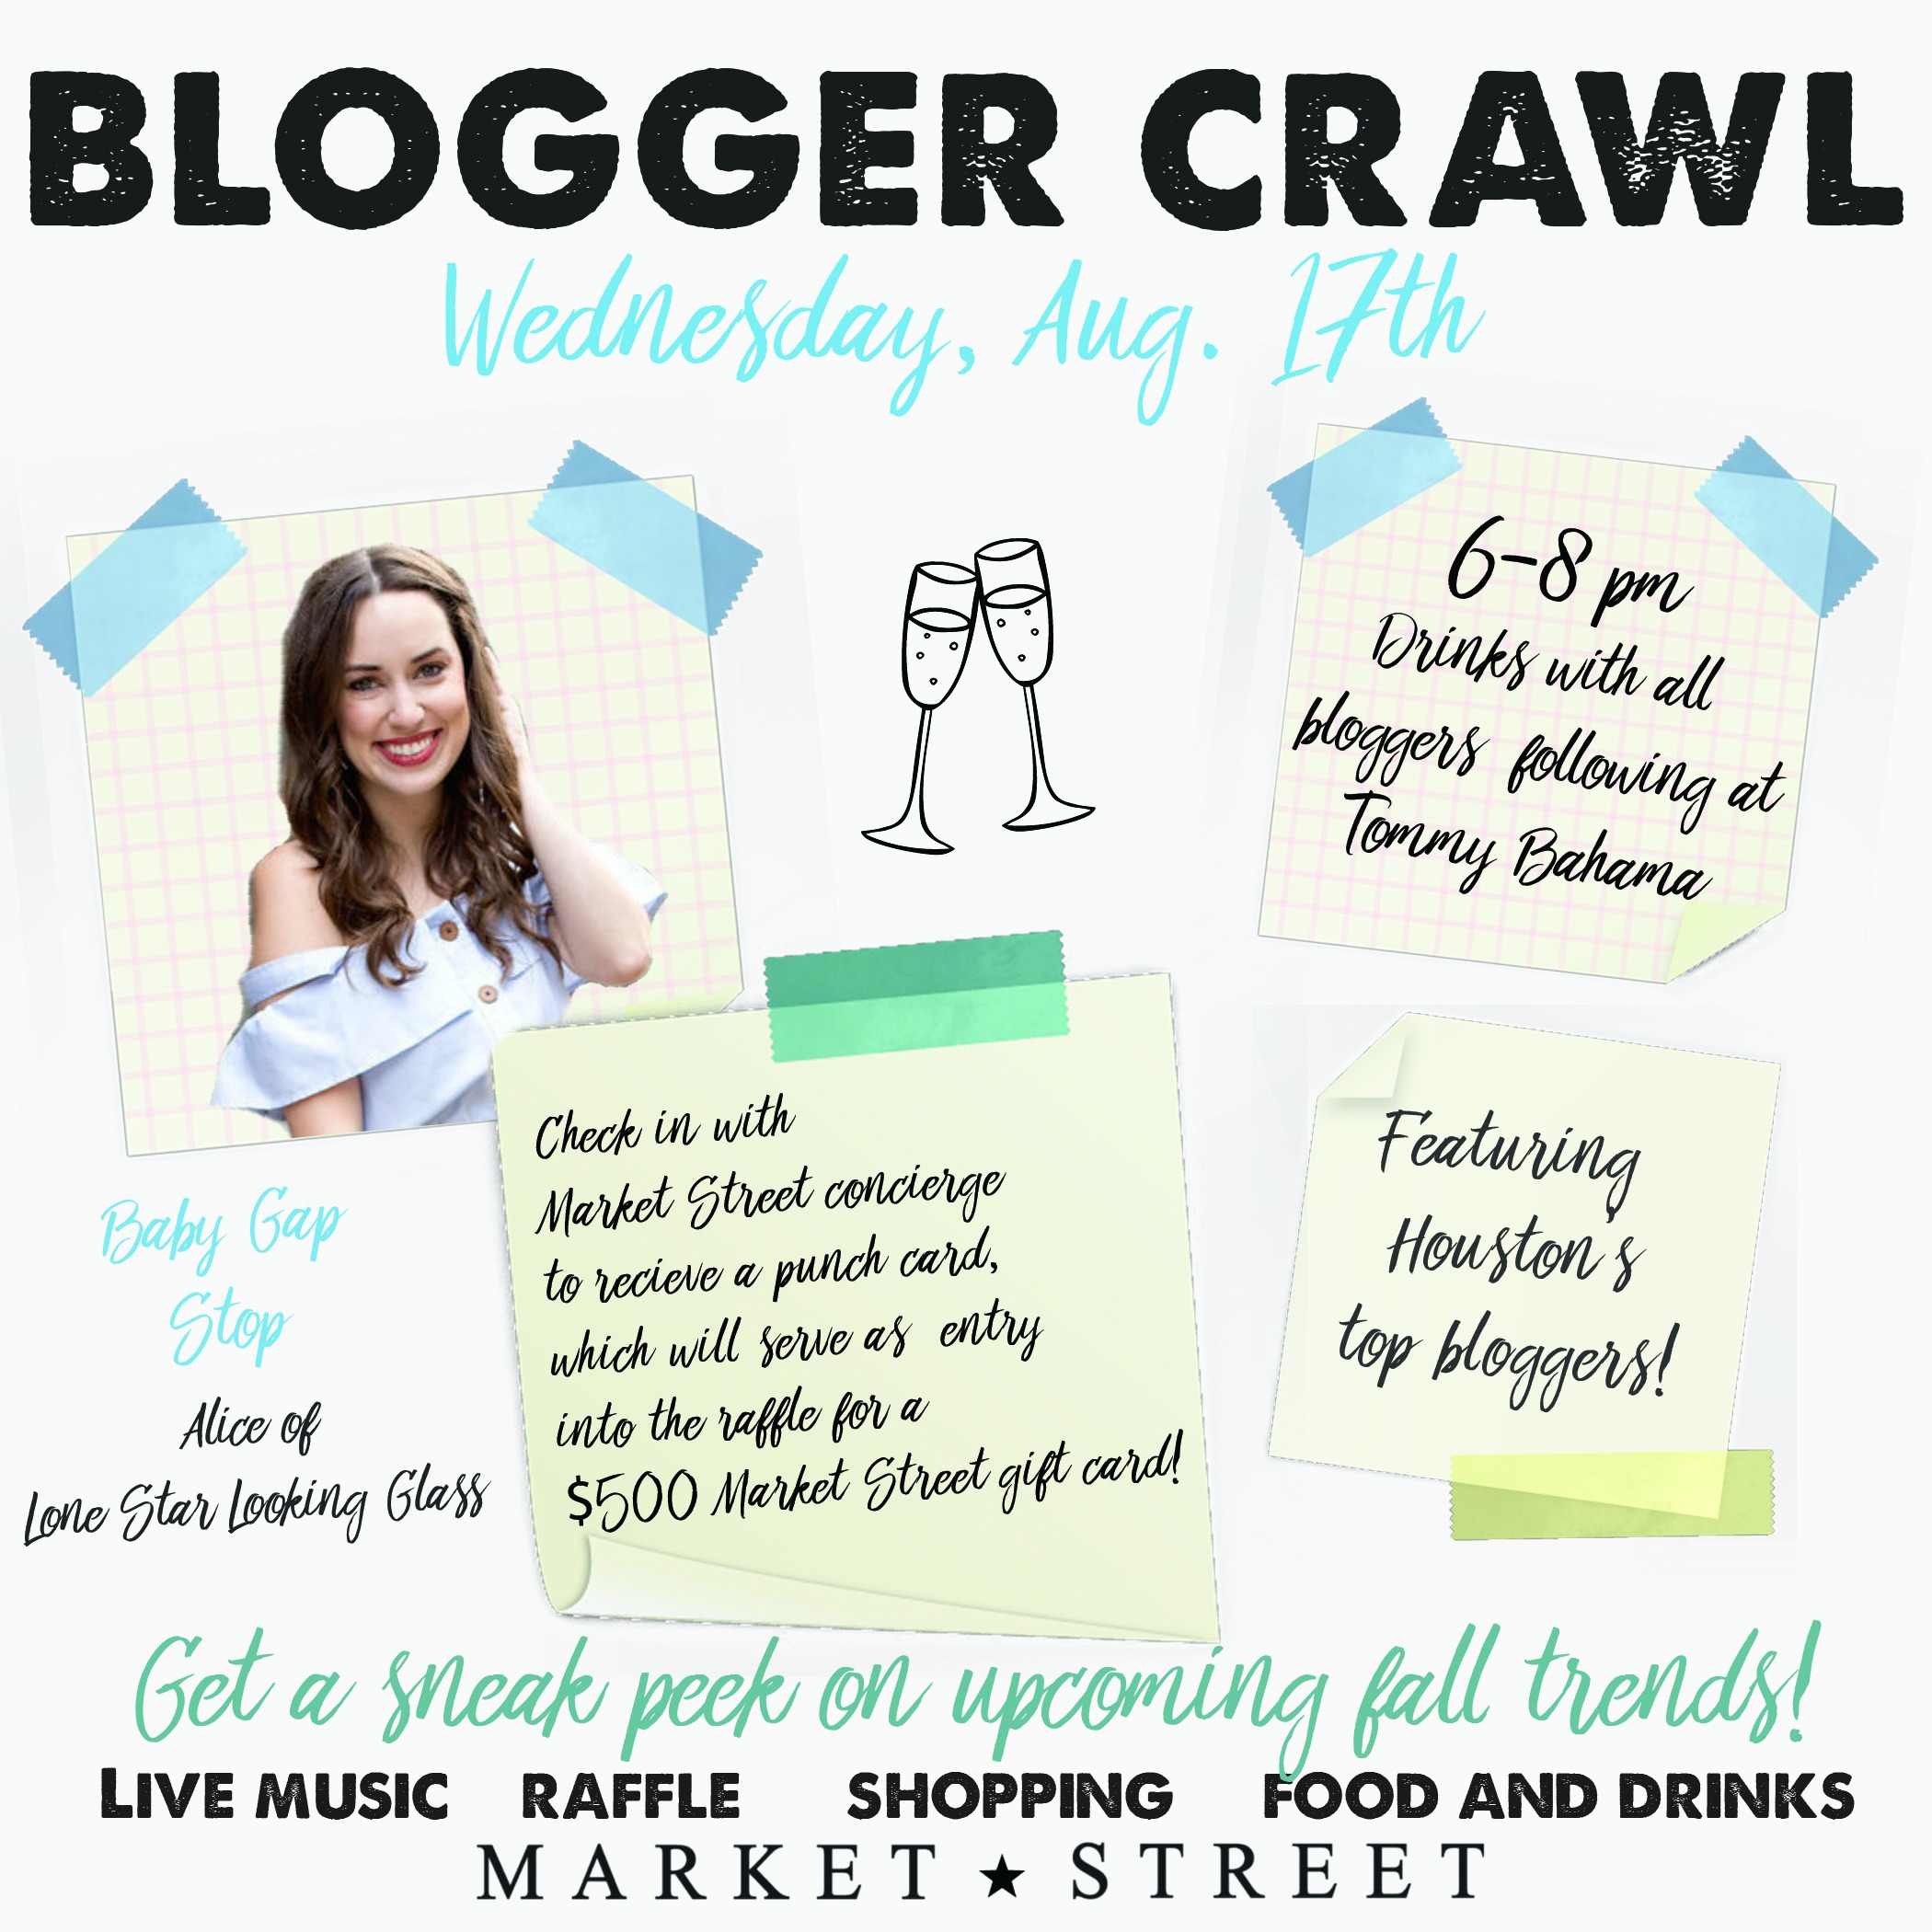 the woodlands market street blogger crawl lone star looking glass and baby gap